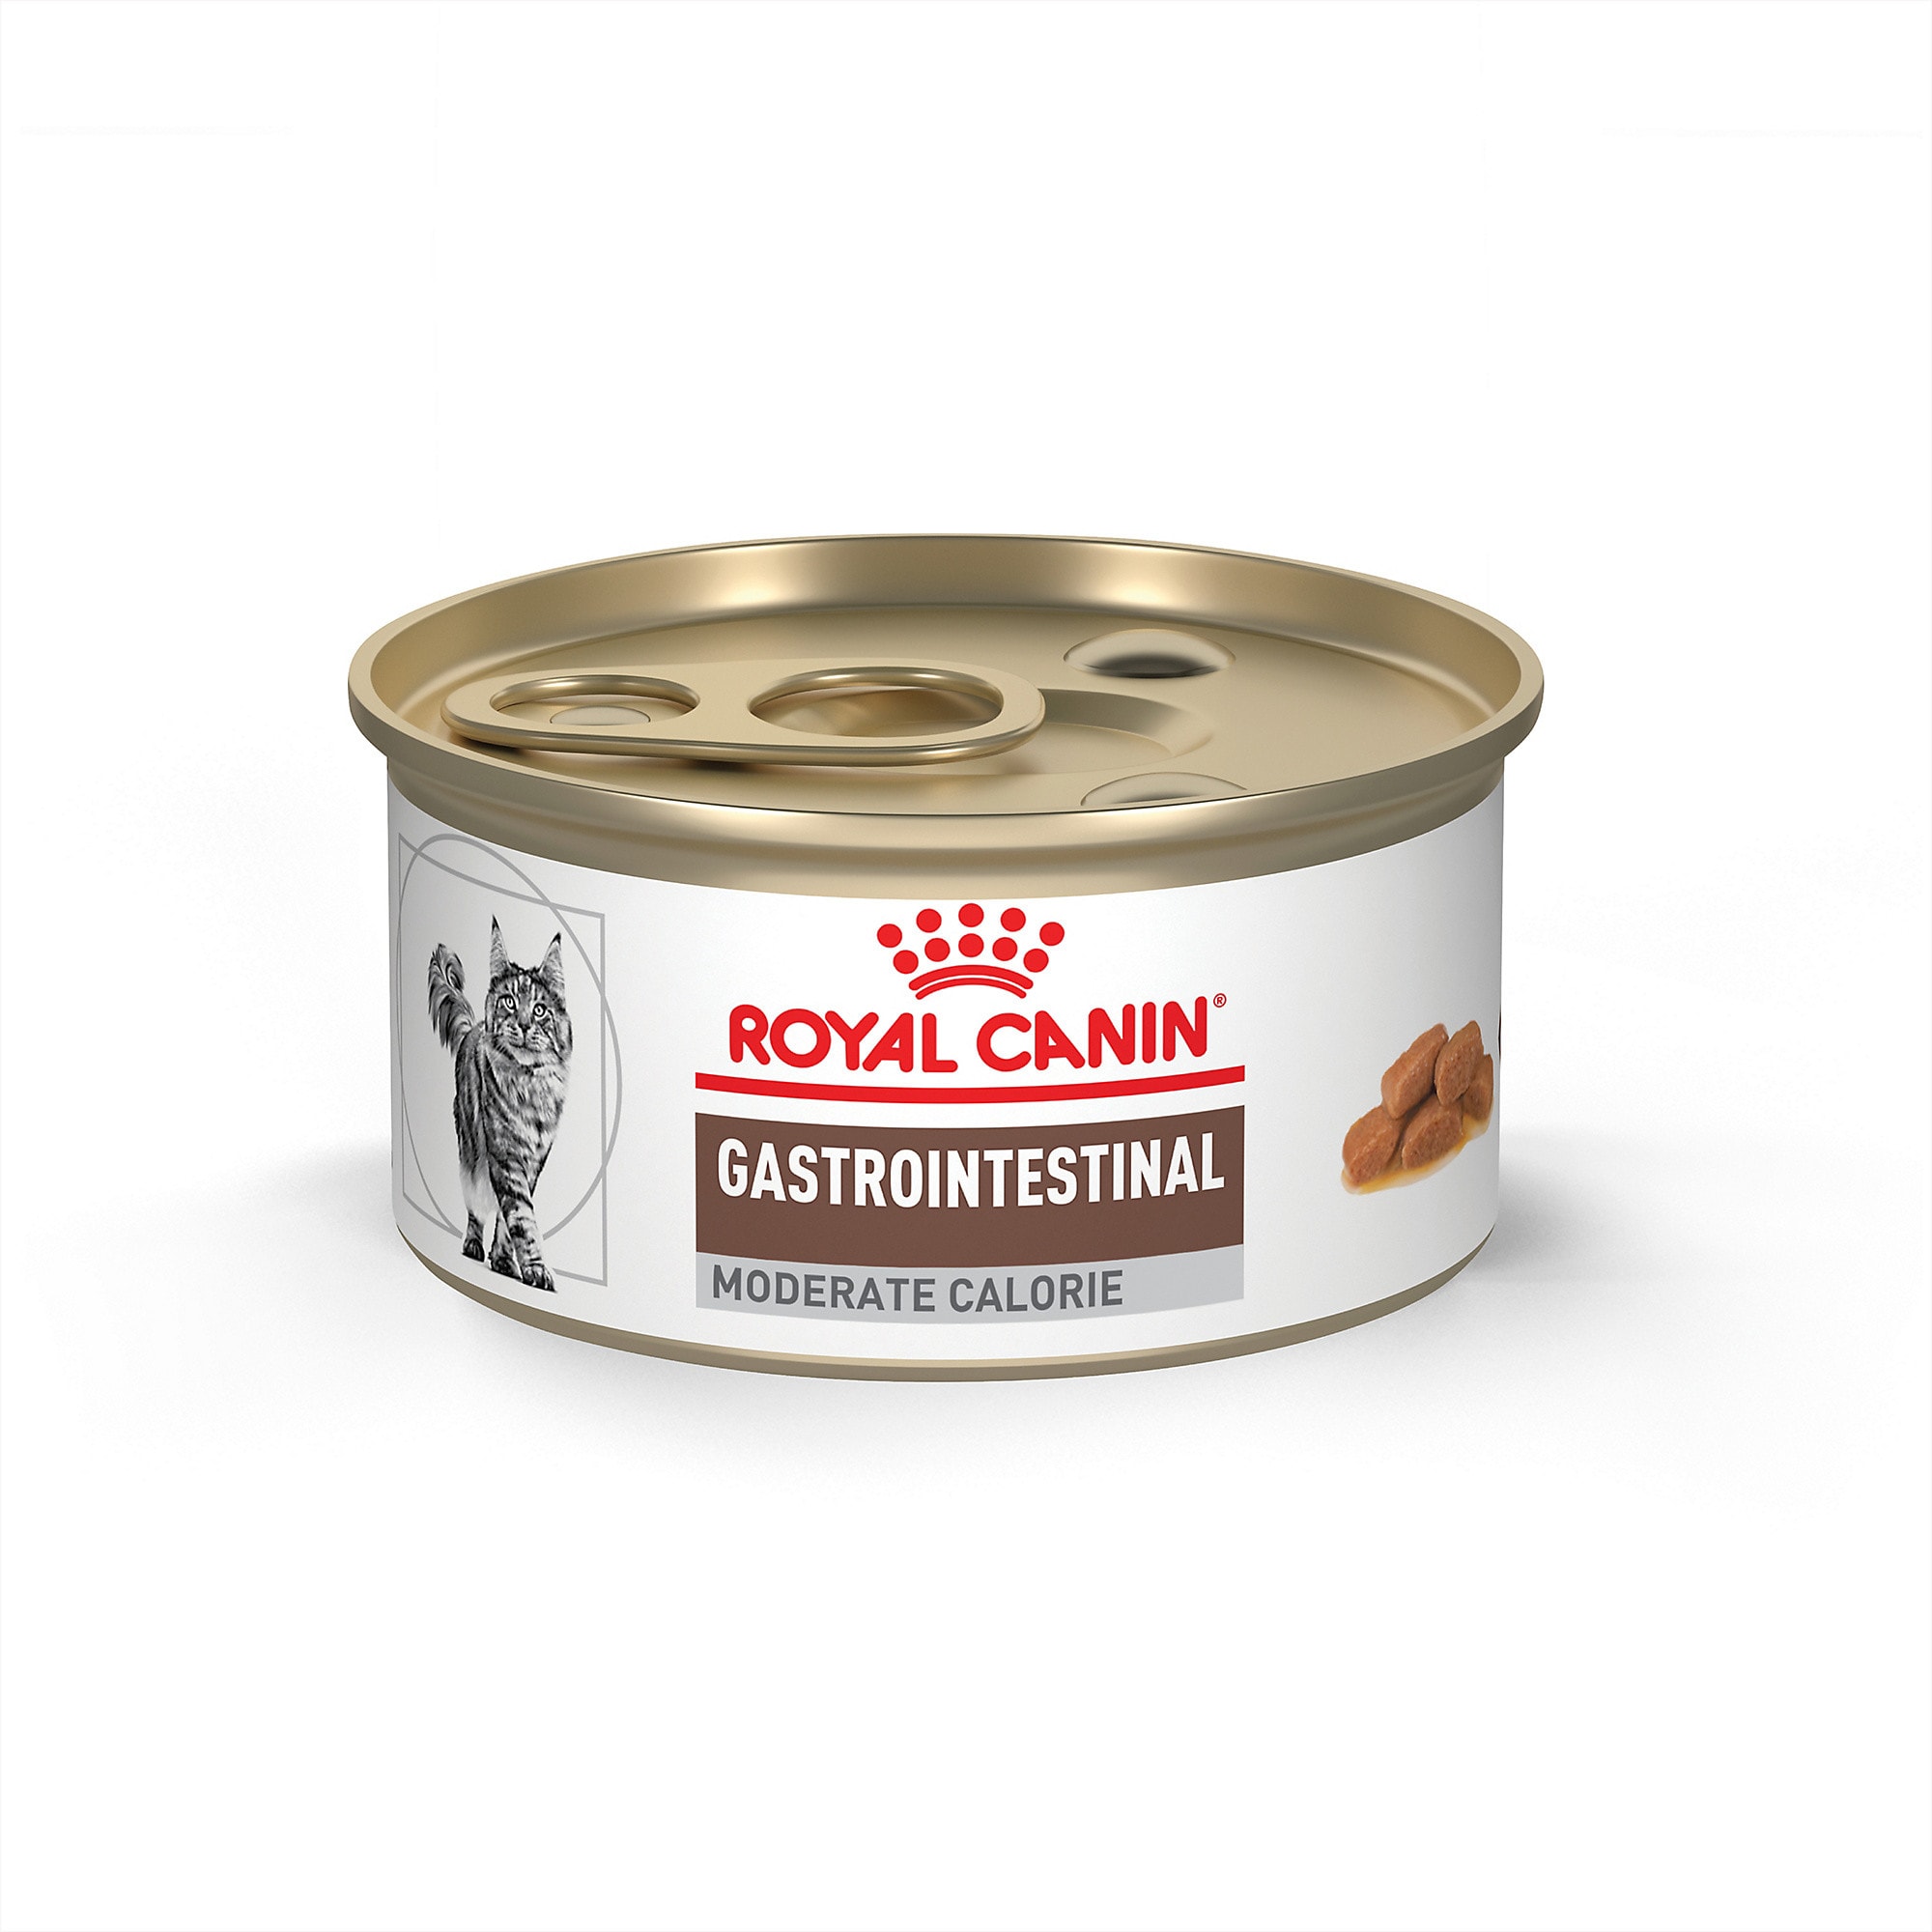 Royal Canin Gastrointestinal Moderate Calorie Wet Cat Food 3 Oz Case Of 24 Petco